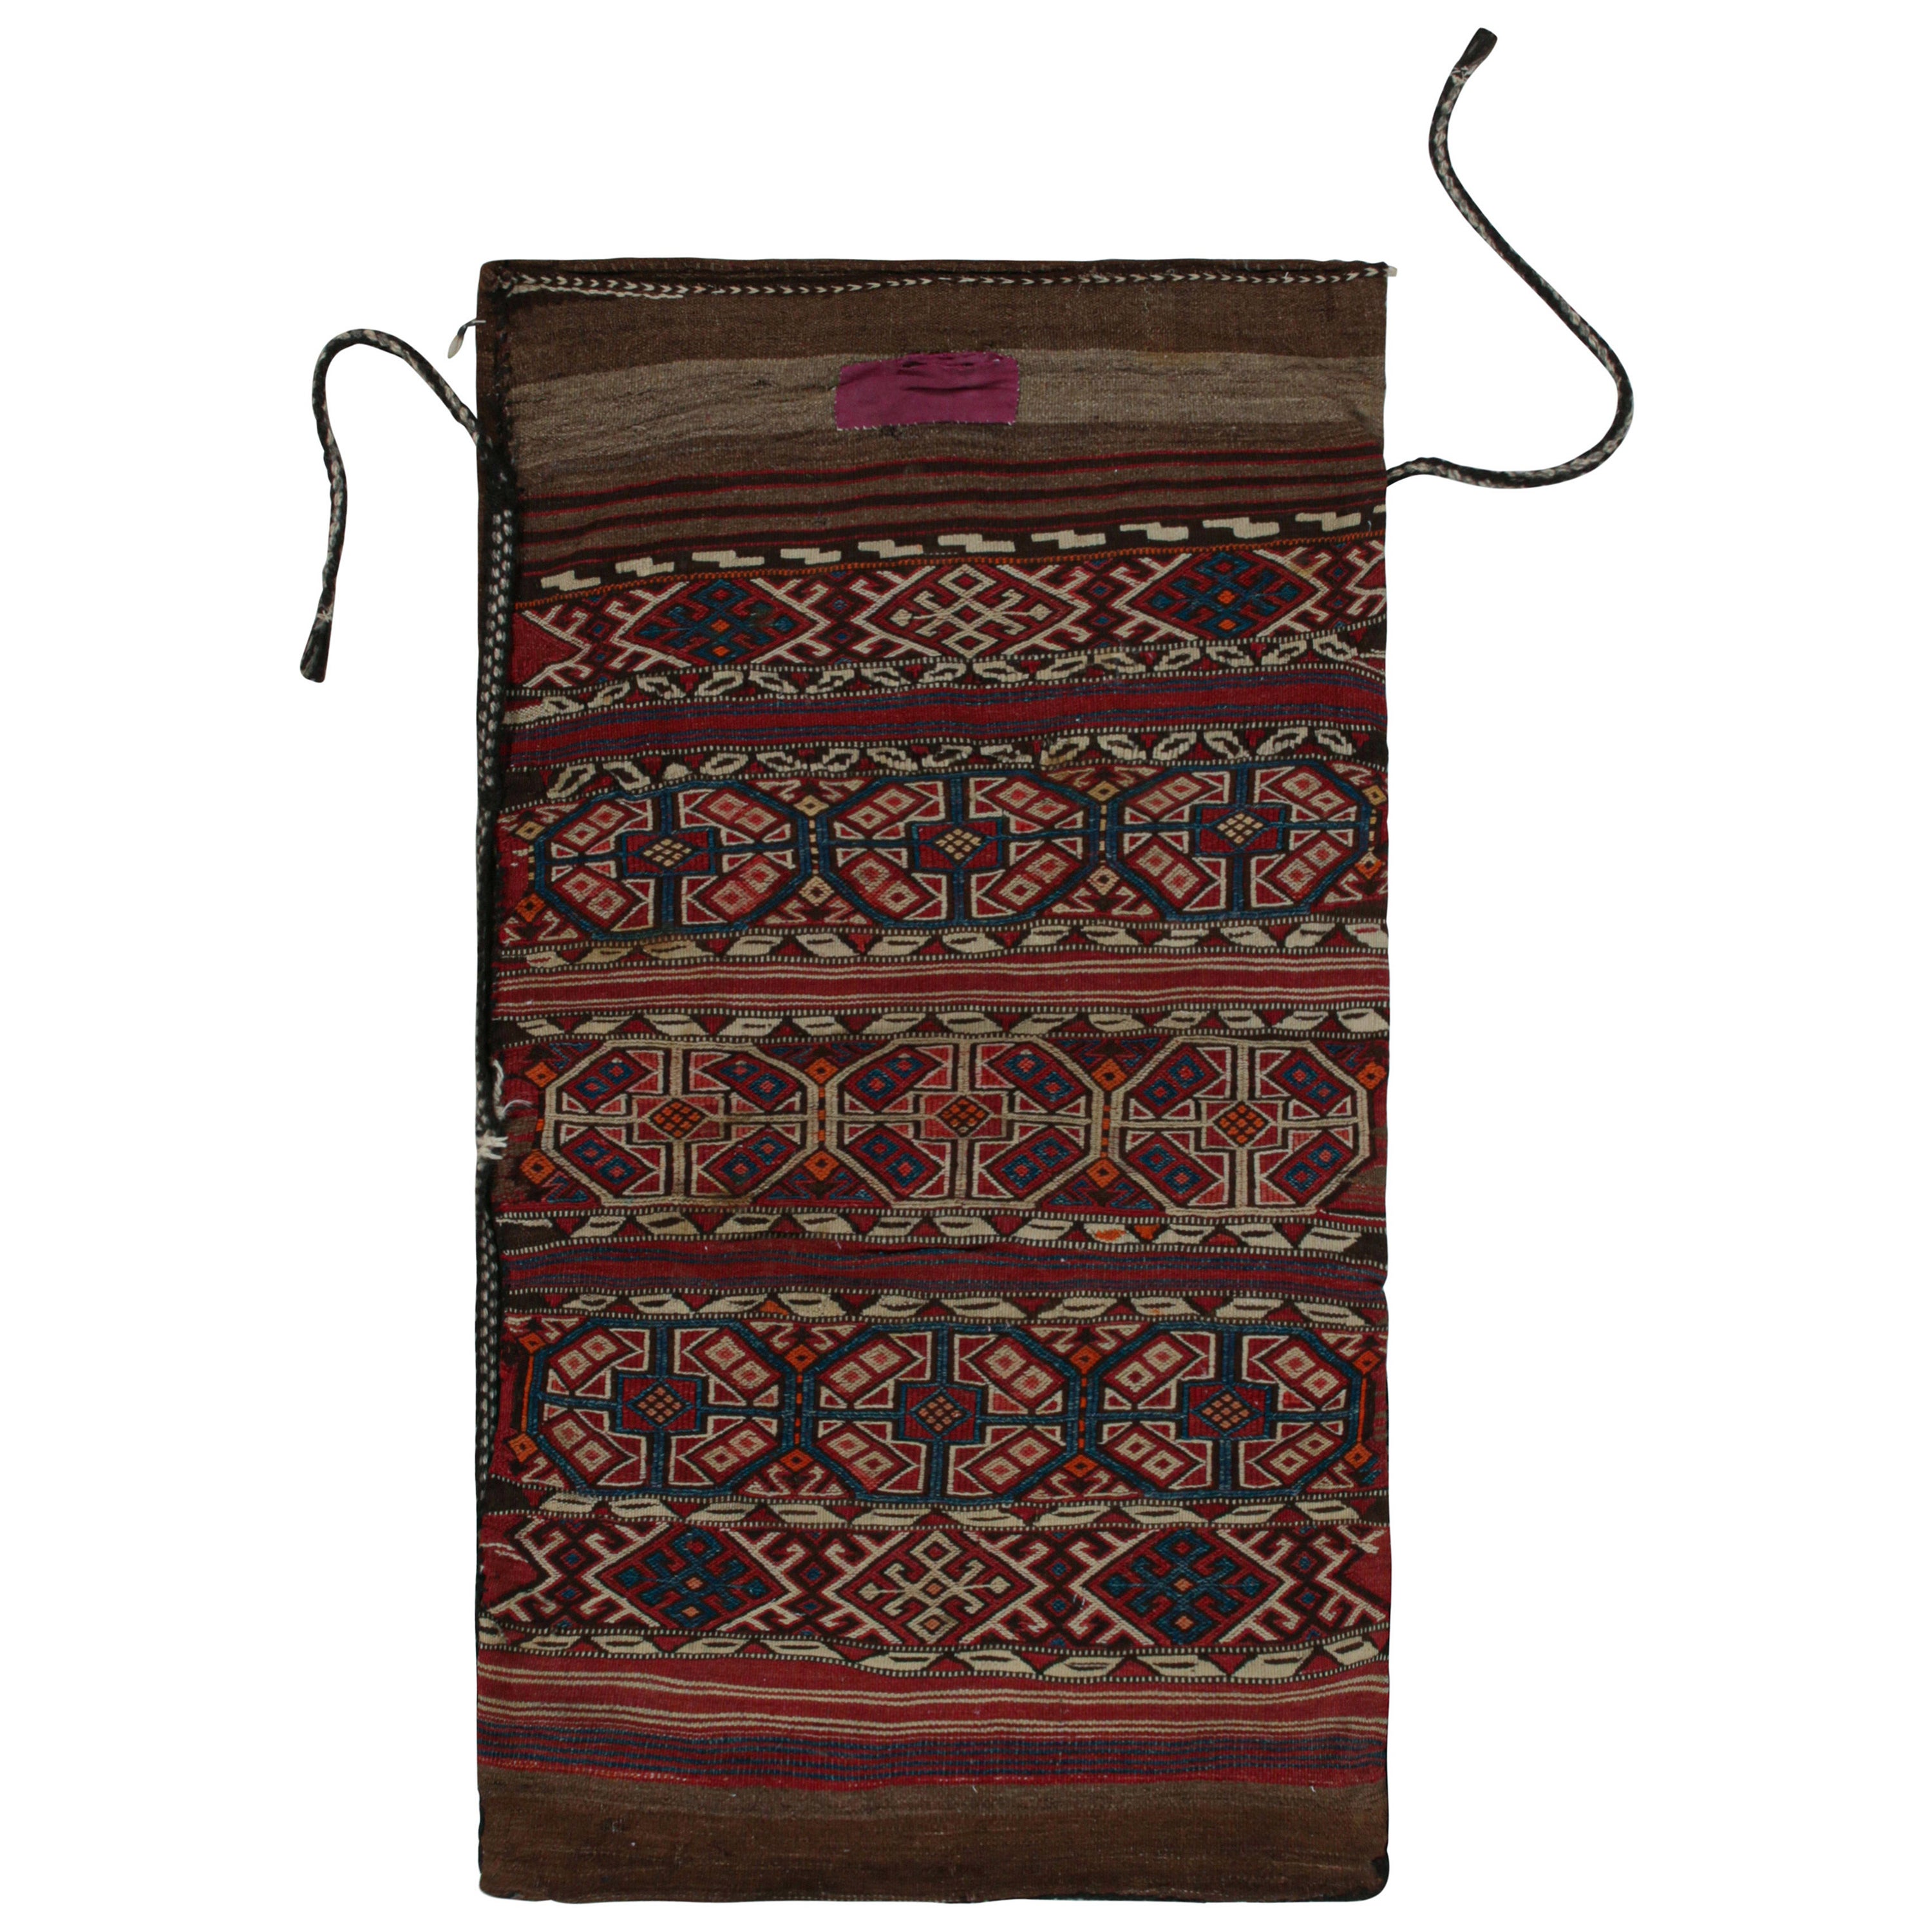 Antique Tribal Bag & Flatweave Textile with Geometric Patterns, from Rug & Kilim For Sale